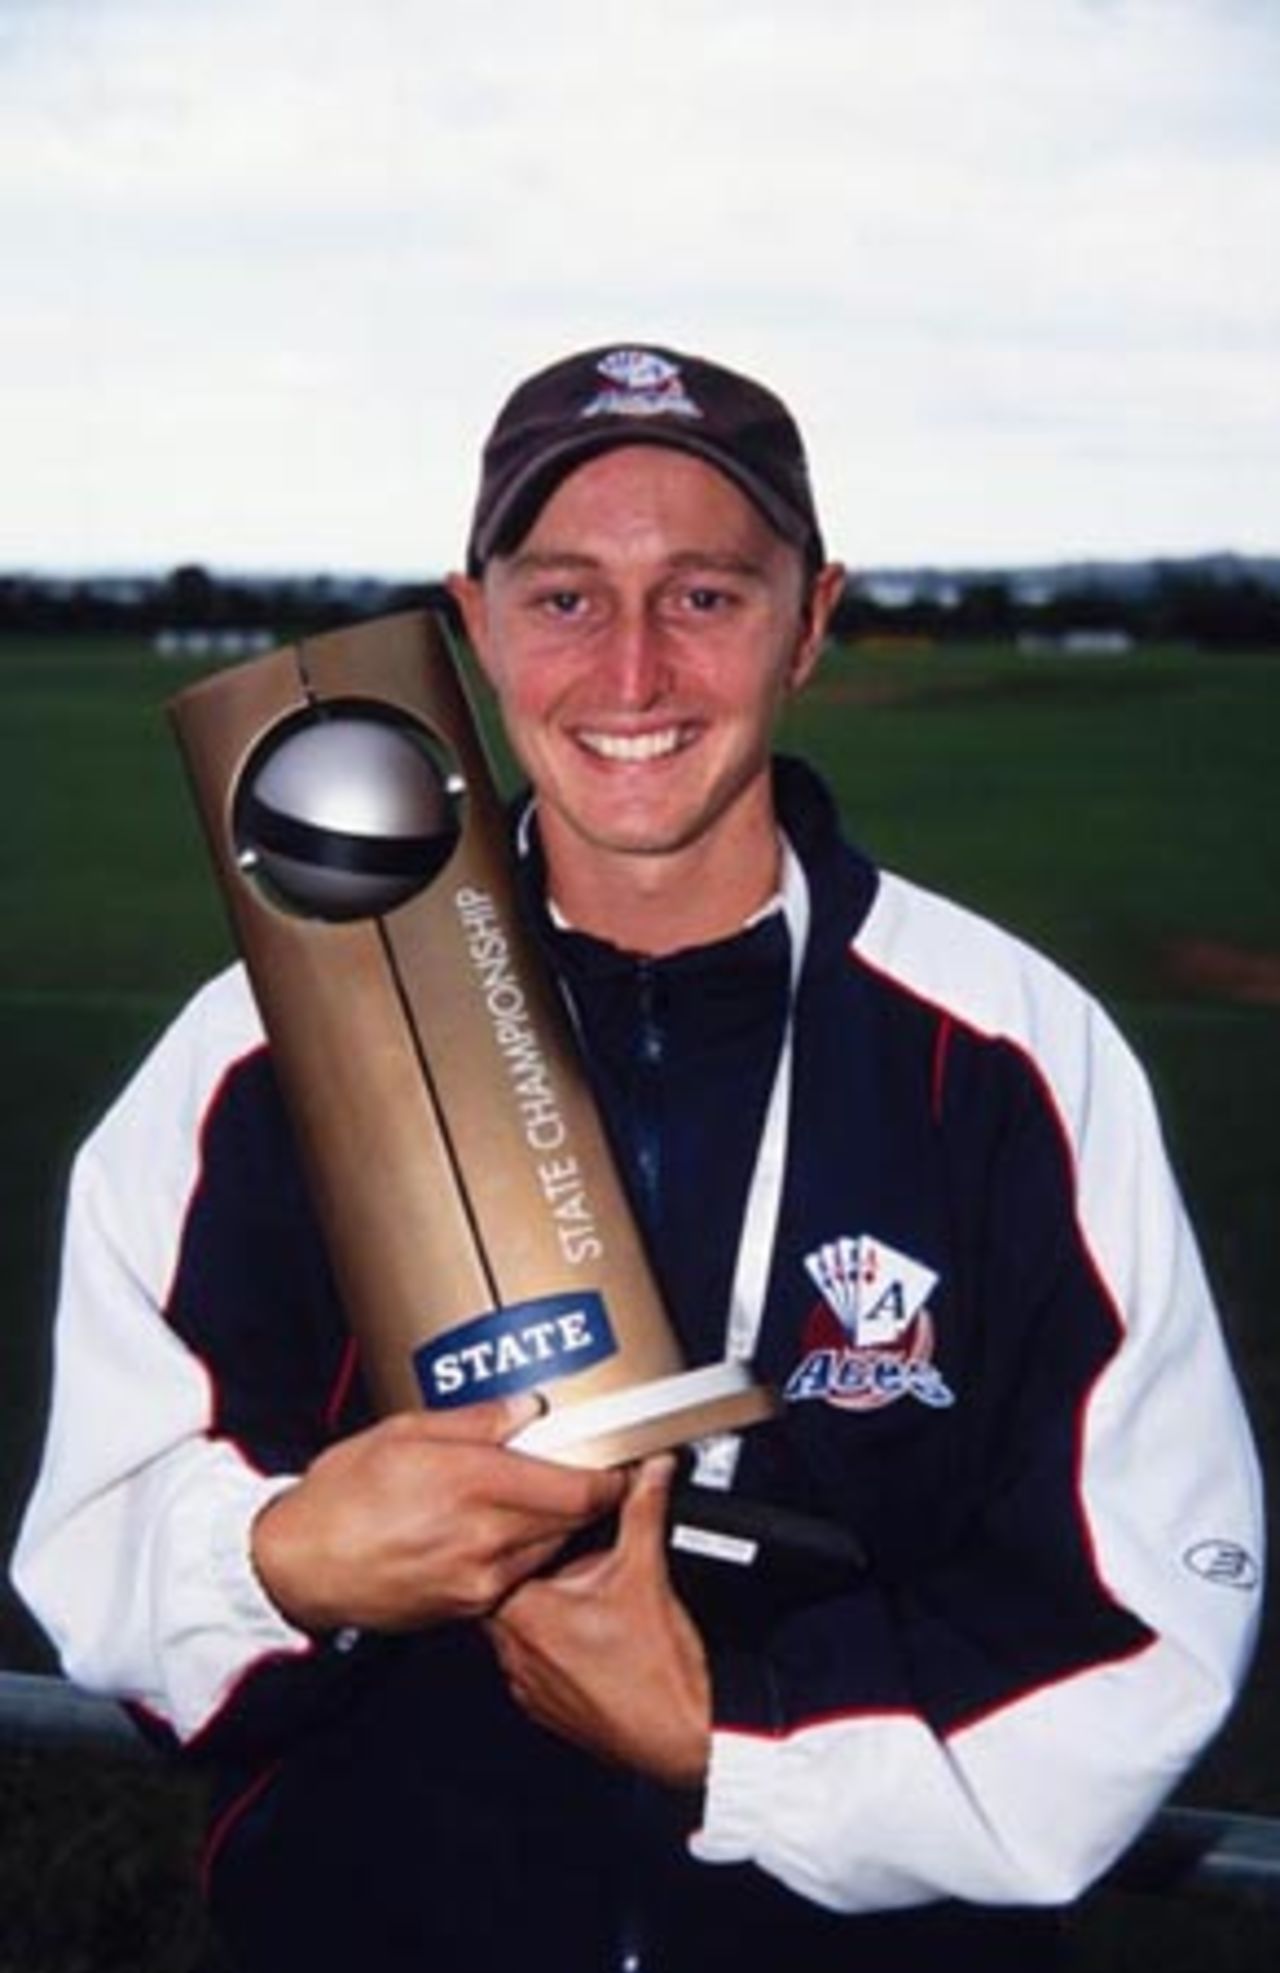 Auckland captain Brooke Walker with the State Championship trophy. State Championship: Auckland v Wellington at Colin Maiden Park, Auckland, 24-27 March 2002 (27 March 2002).